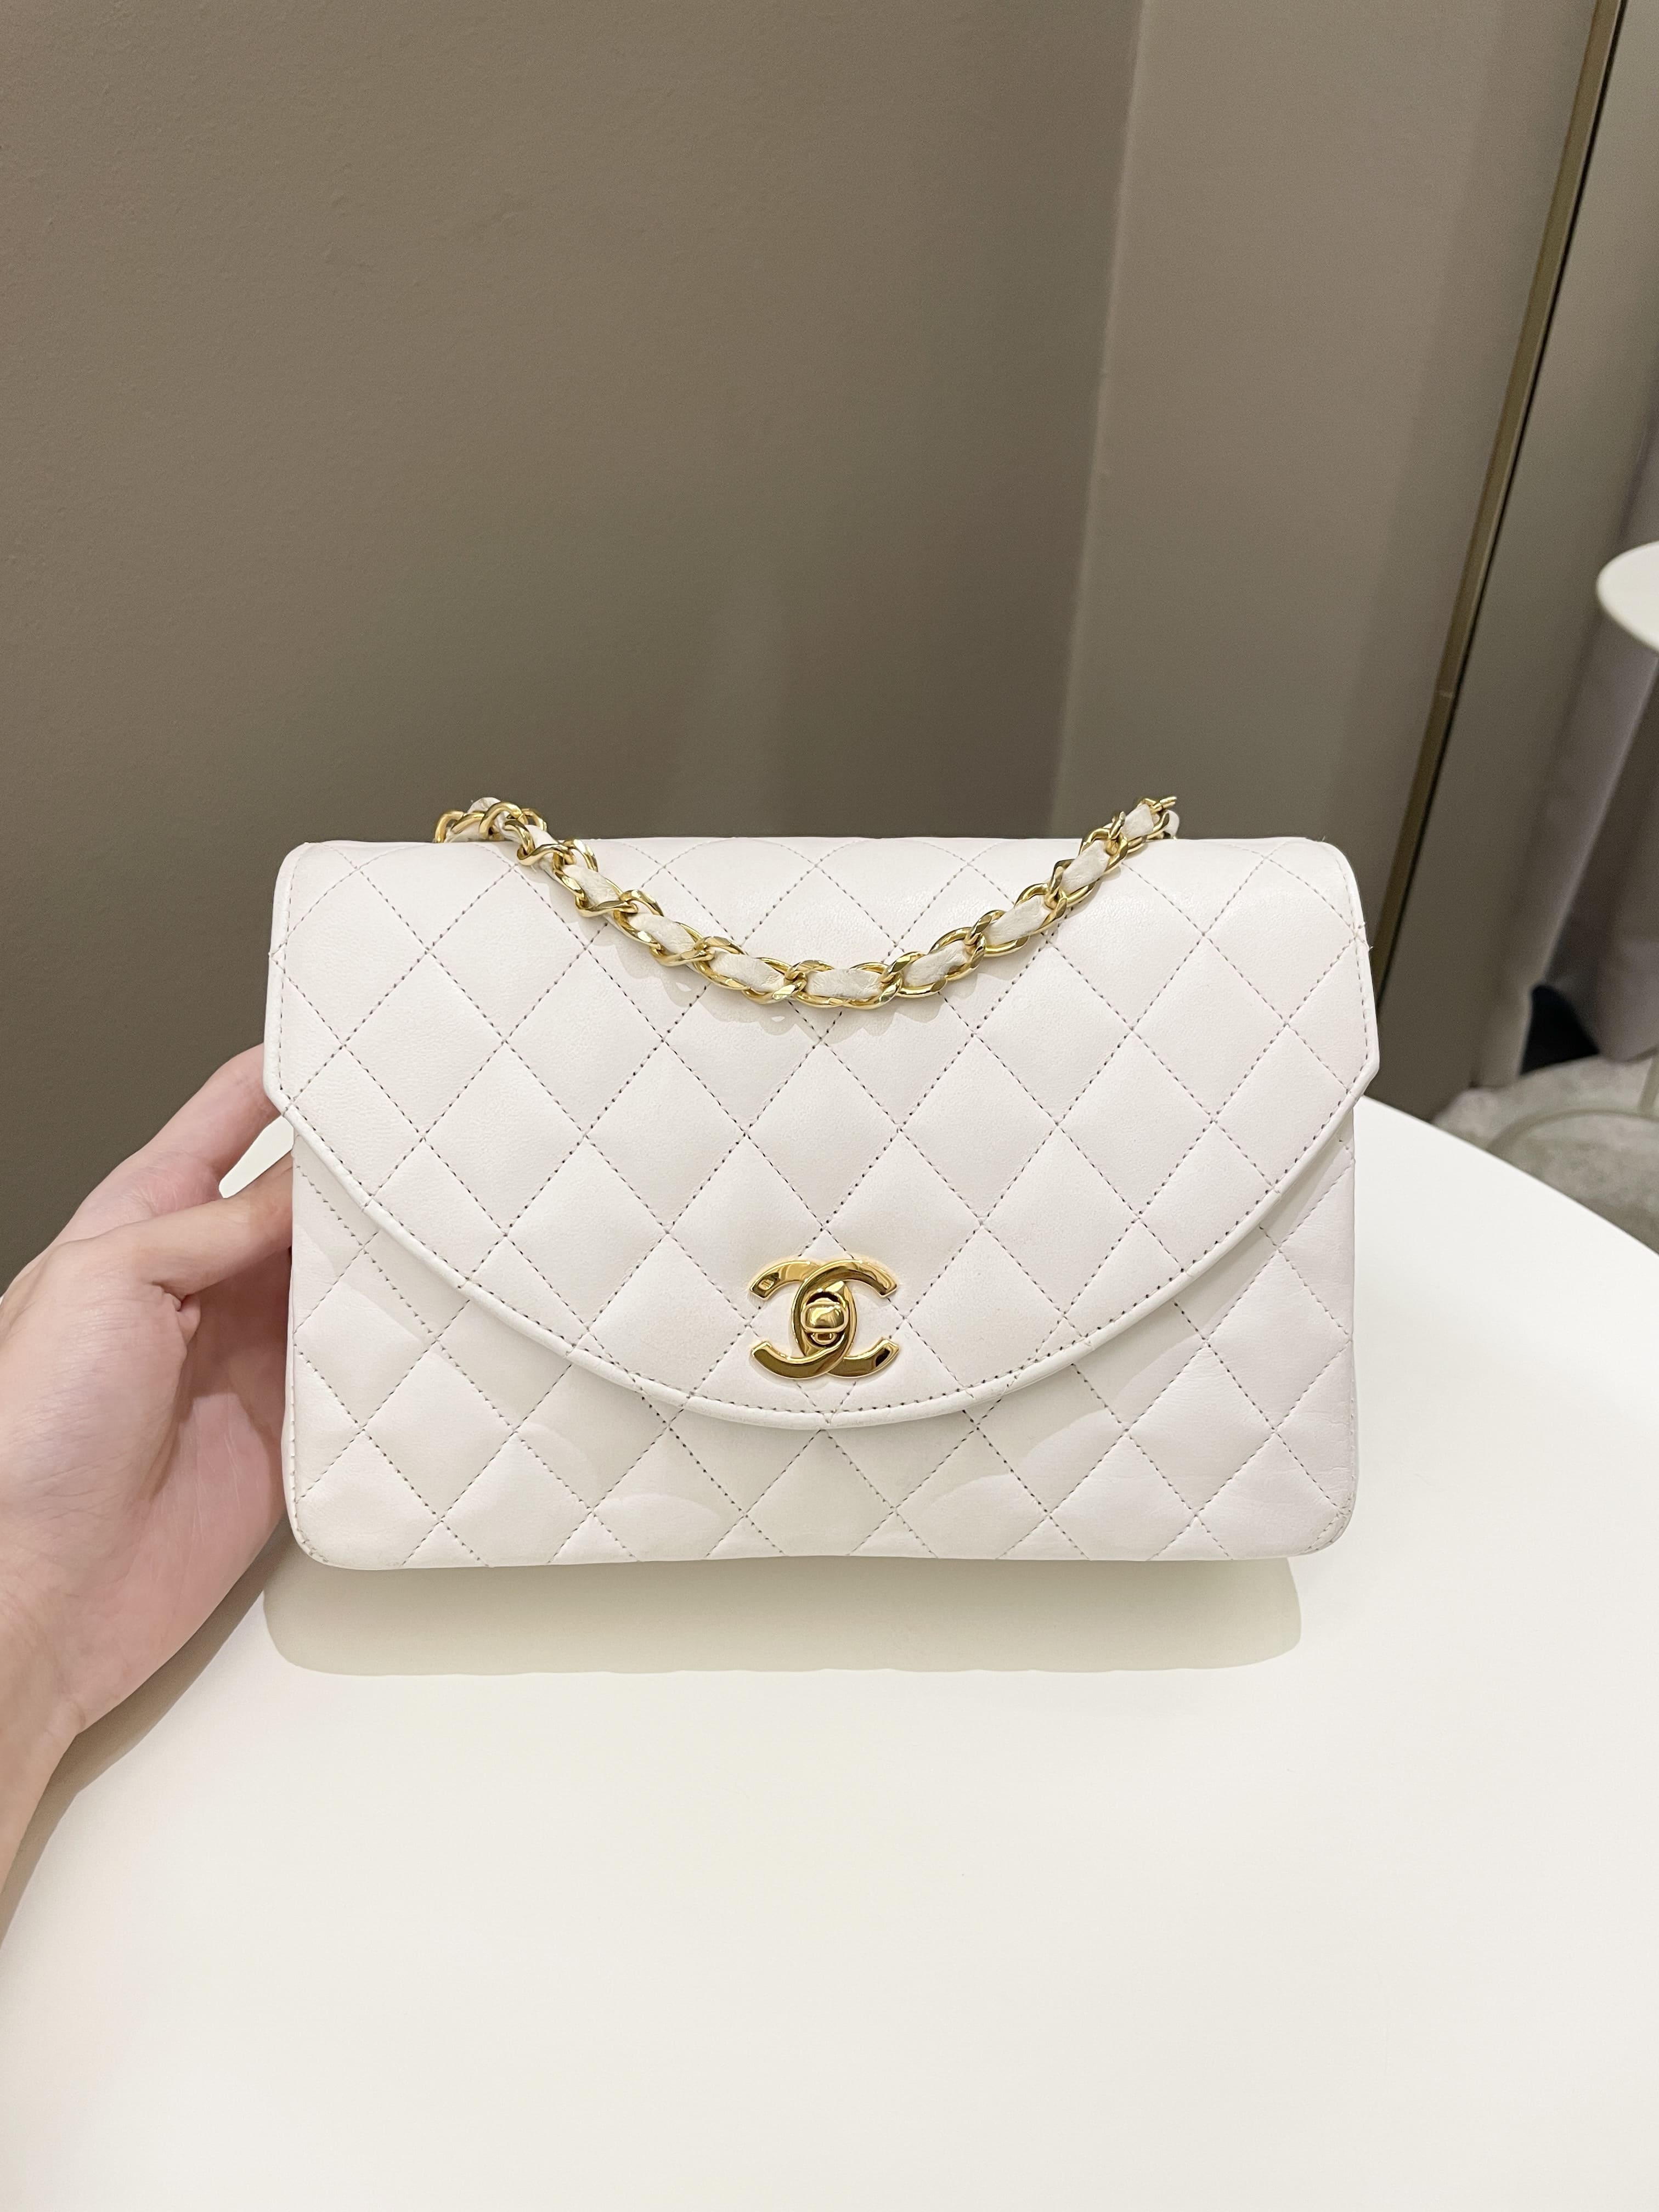 Chanel White Quilted Lambskin Leather Jumbo Classic Single Flap